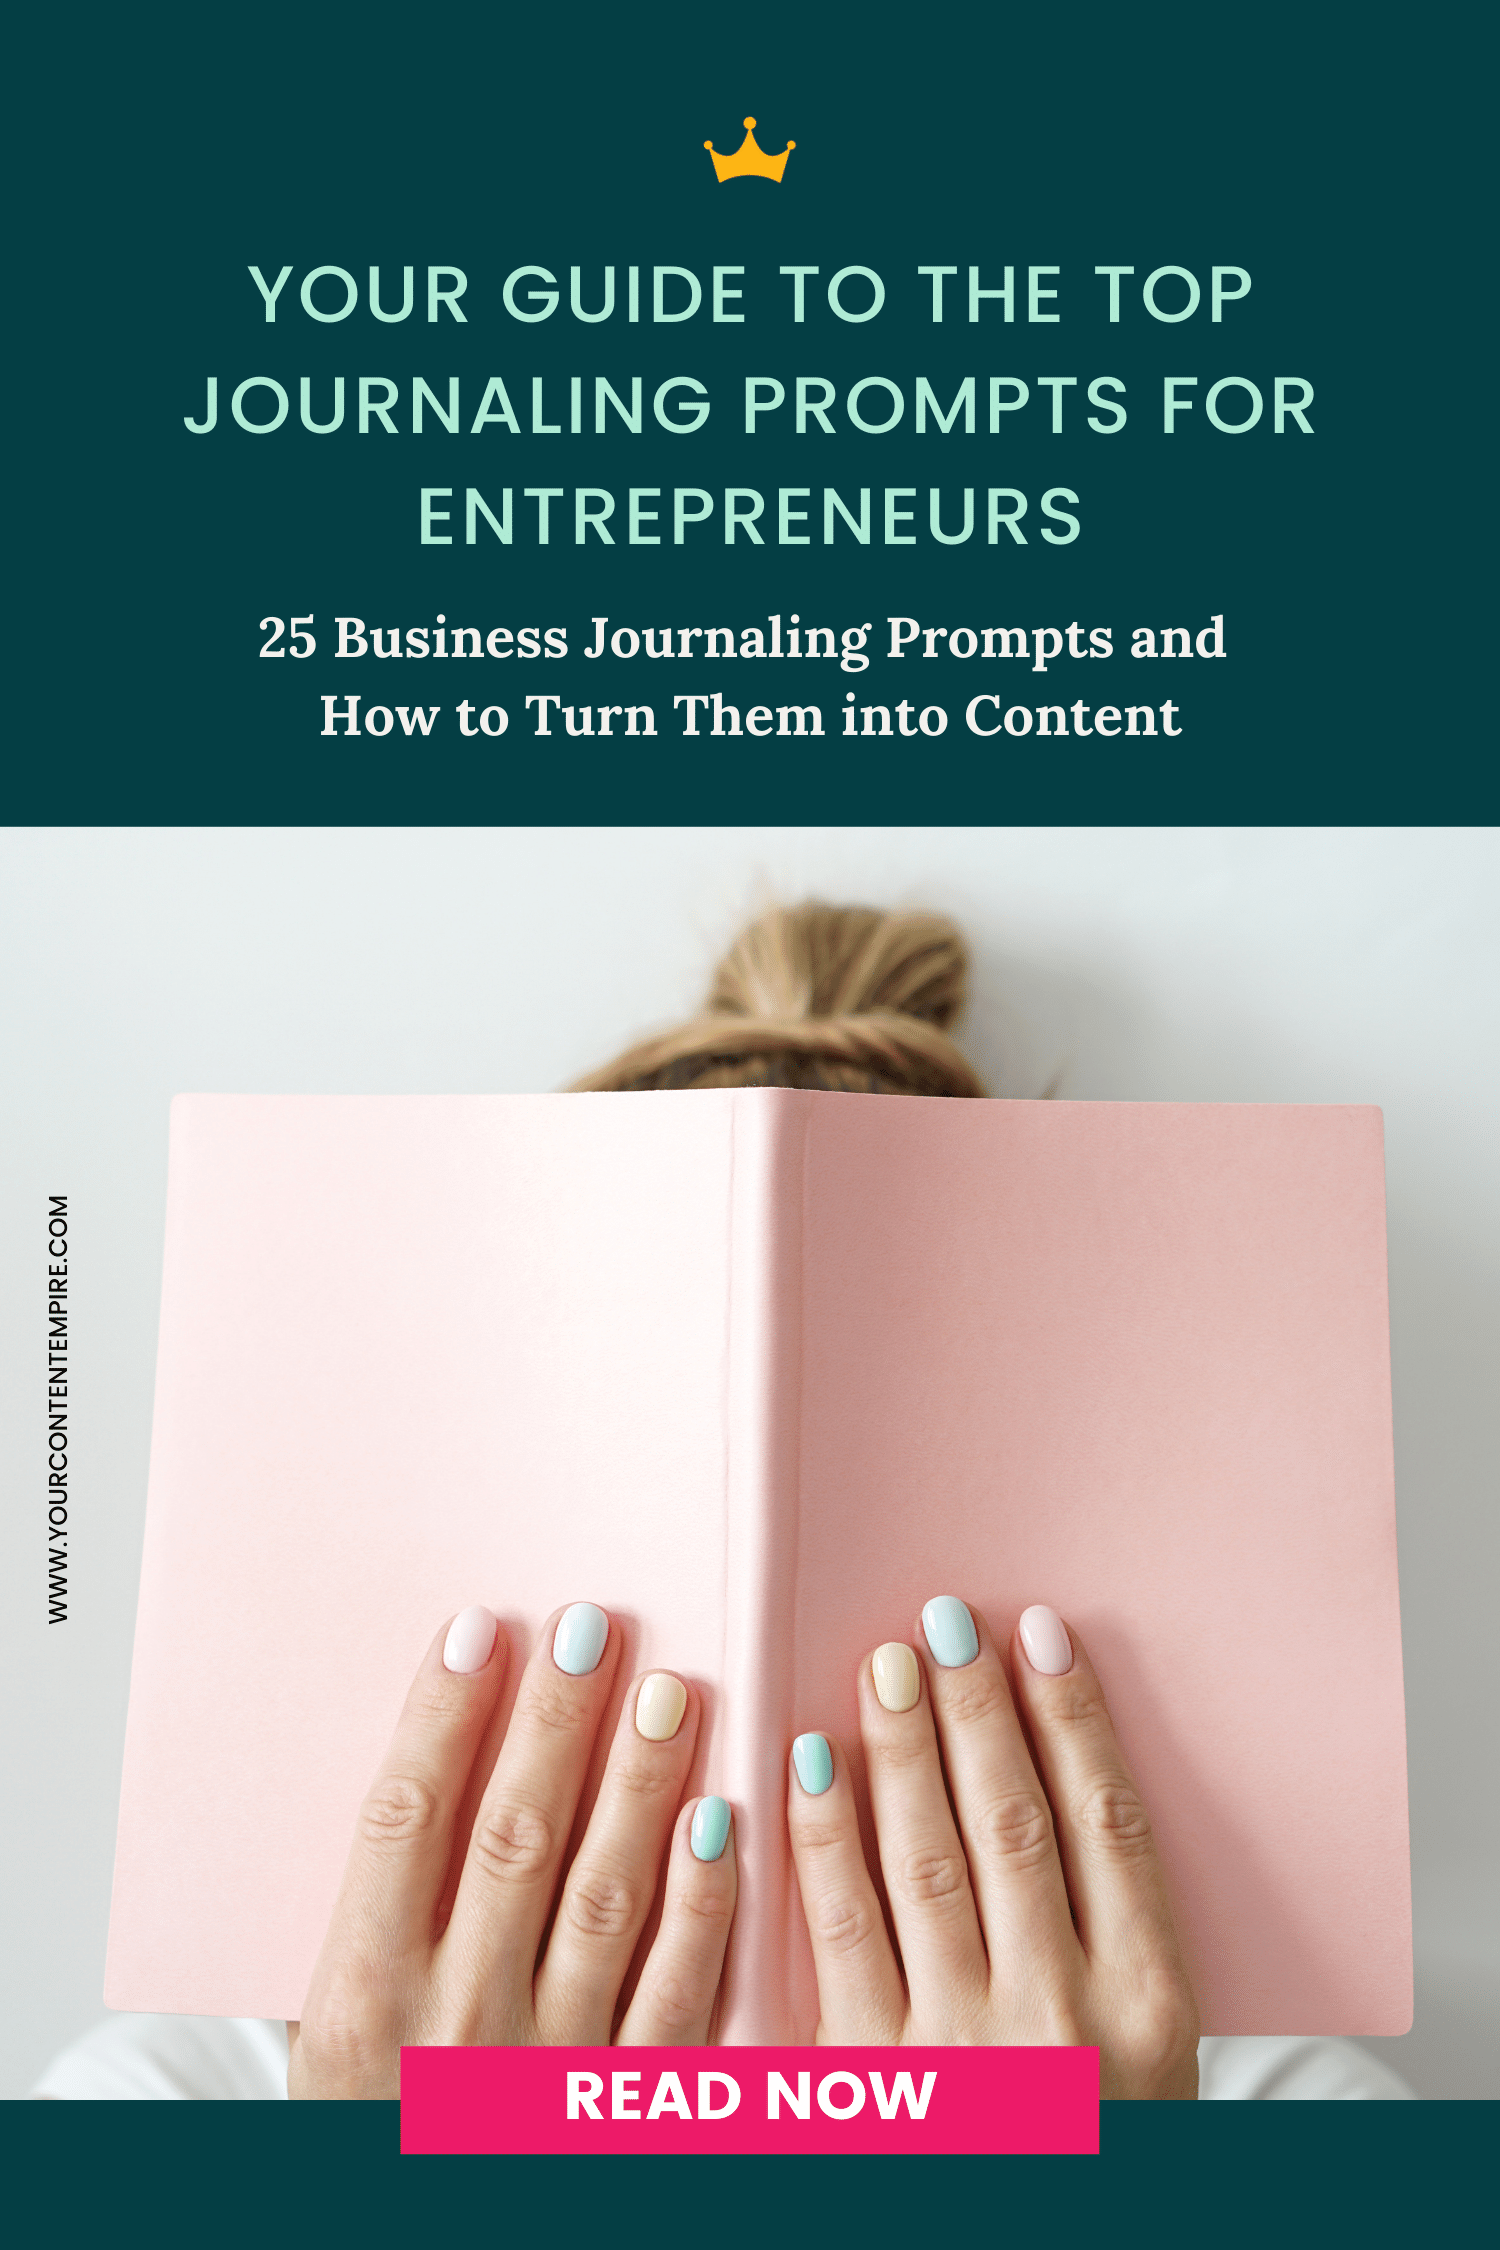 Your Guide to the Top Journaling Prompts for Entrepreneurs